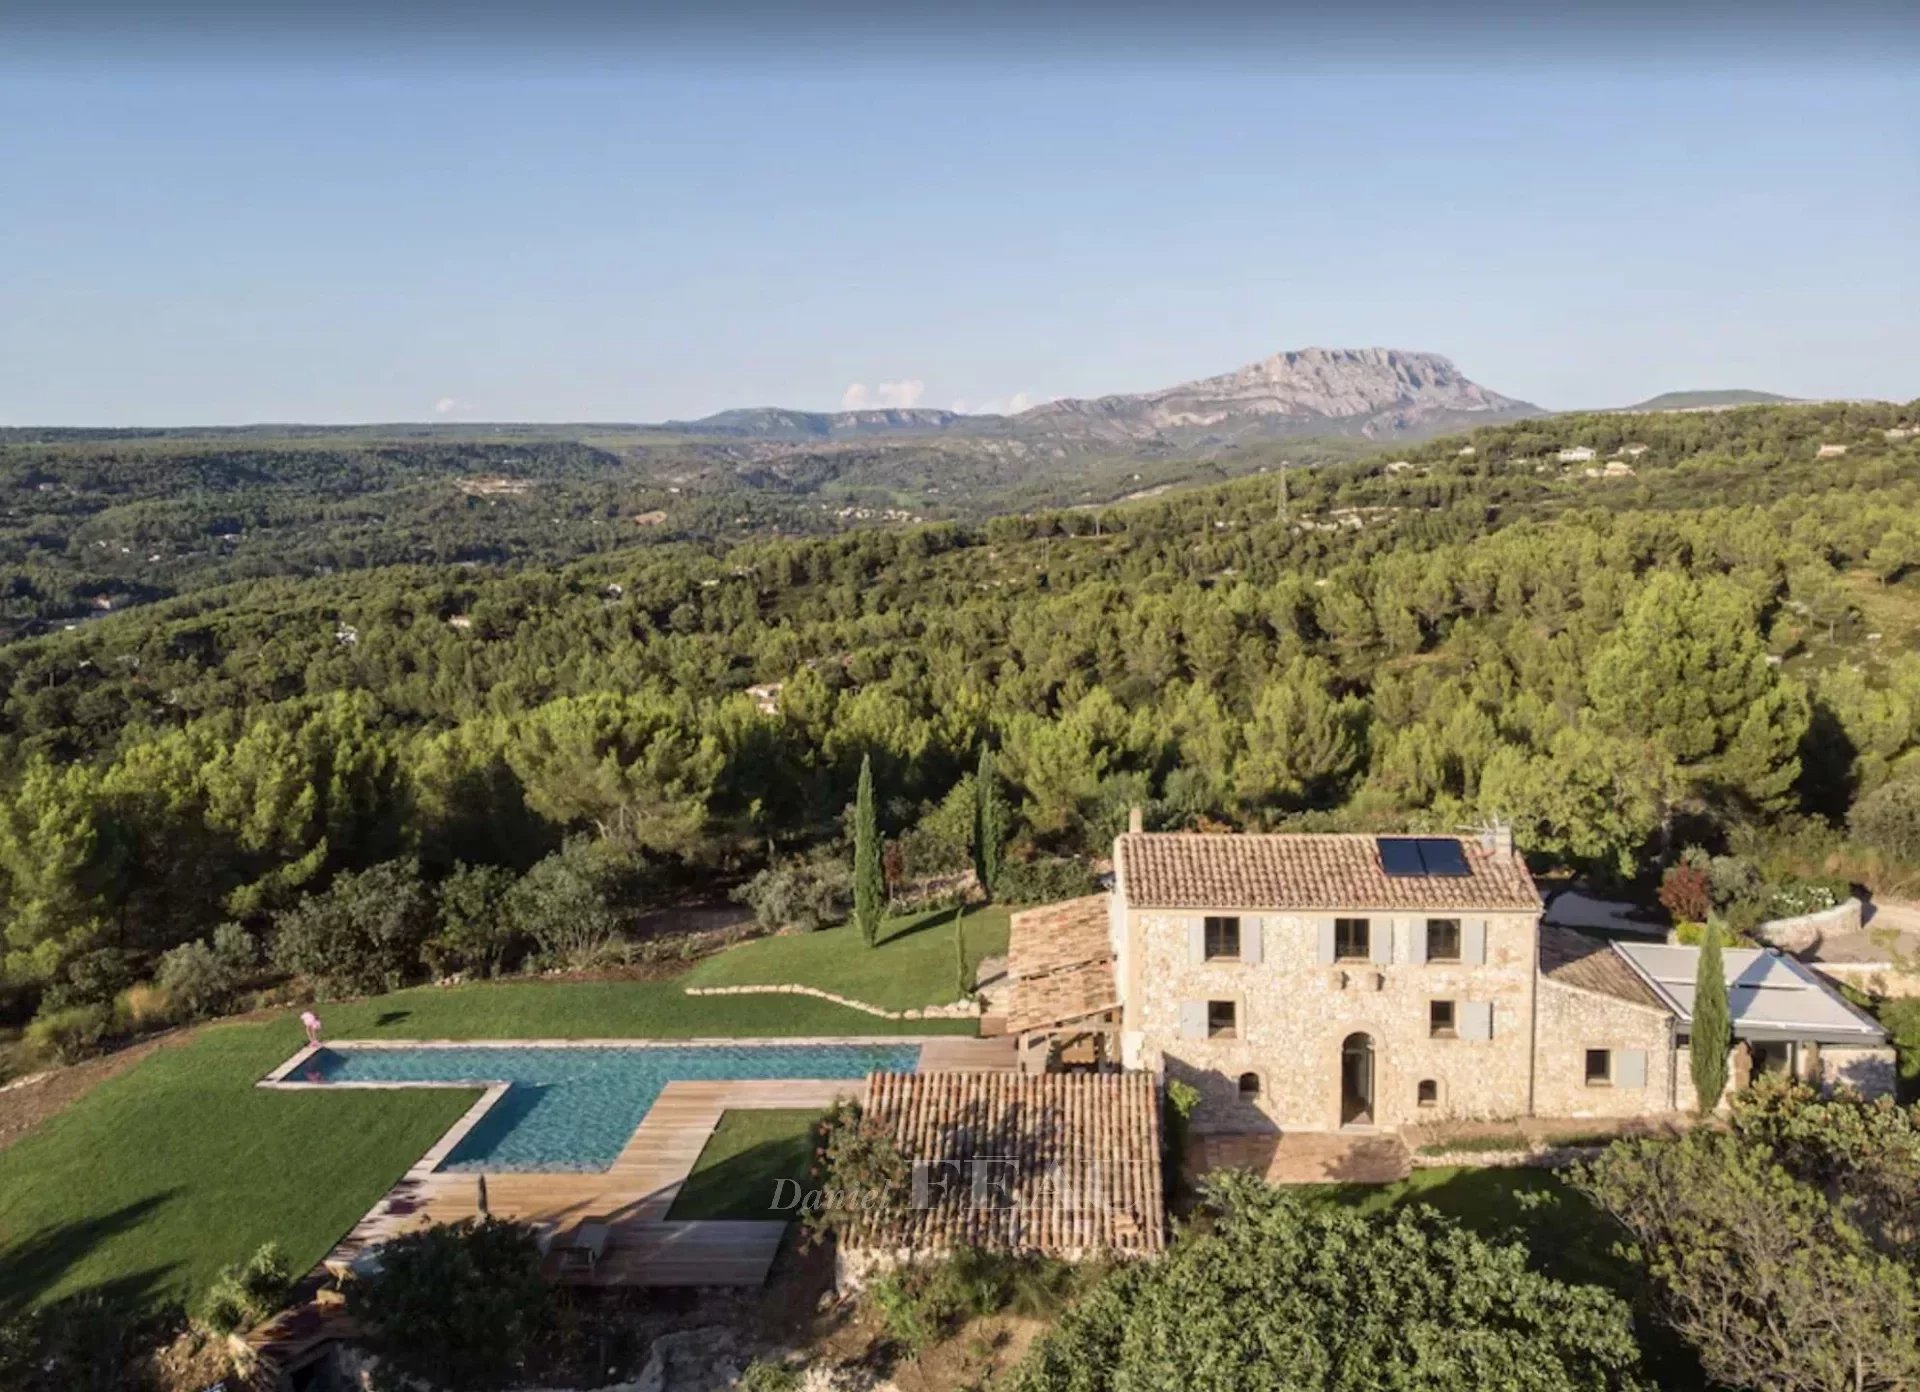 An exceptional property near Aix commanding a view of the iconic Saint Victoire Mountain  Sleeps 10